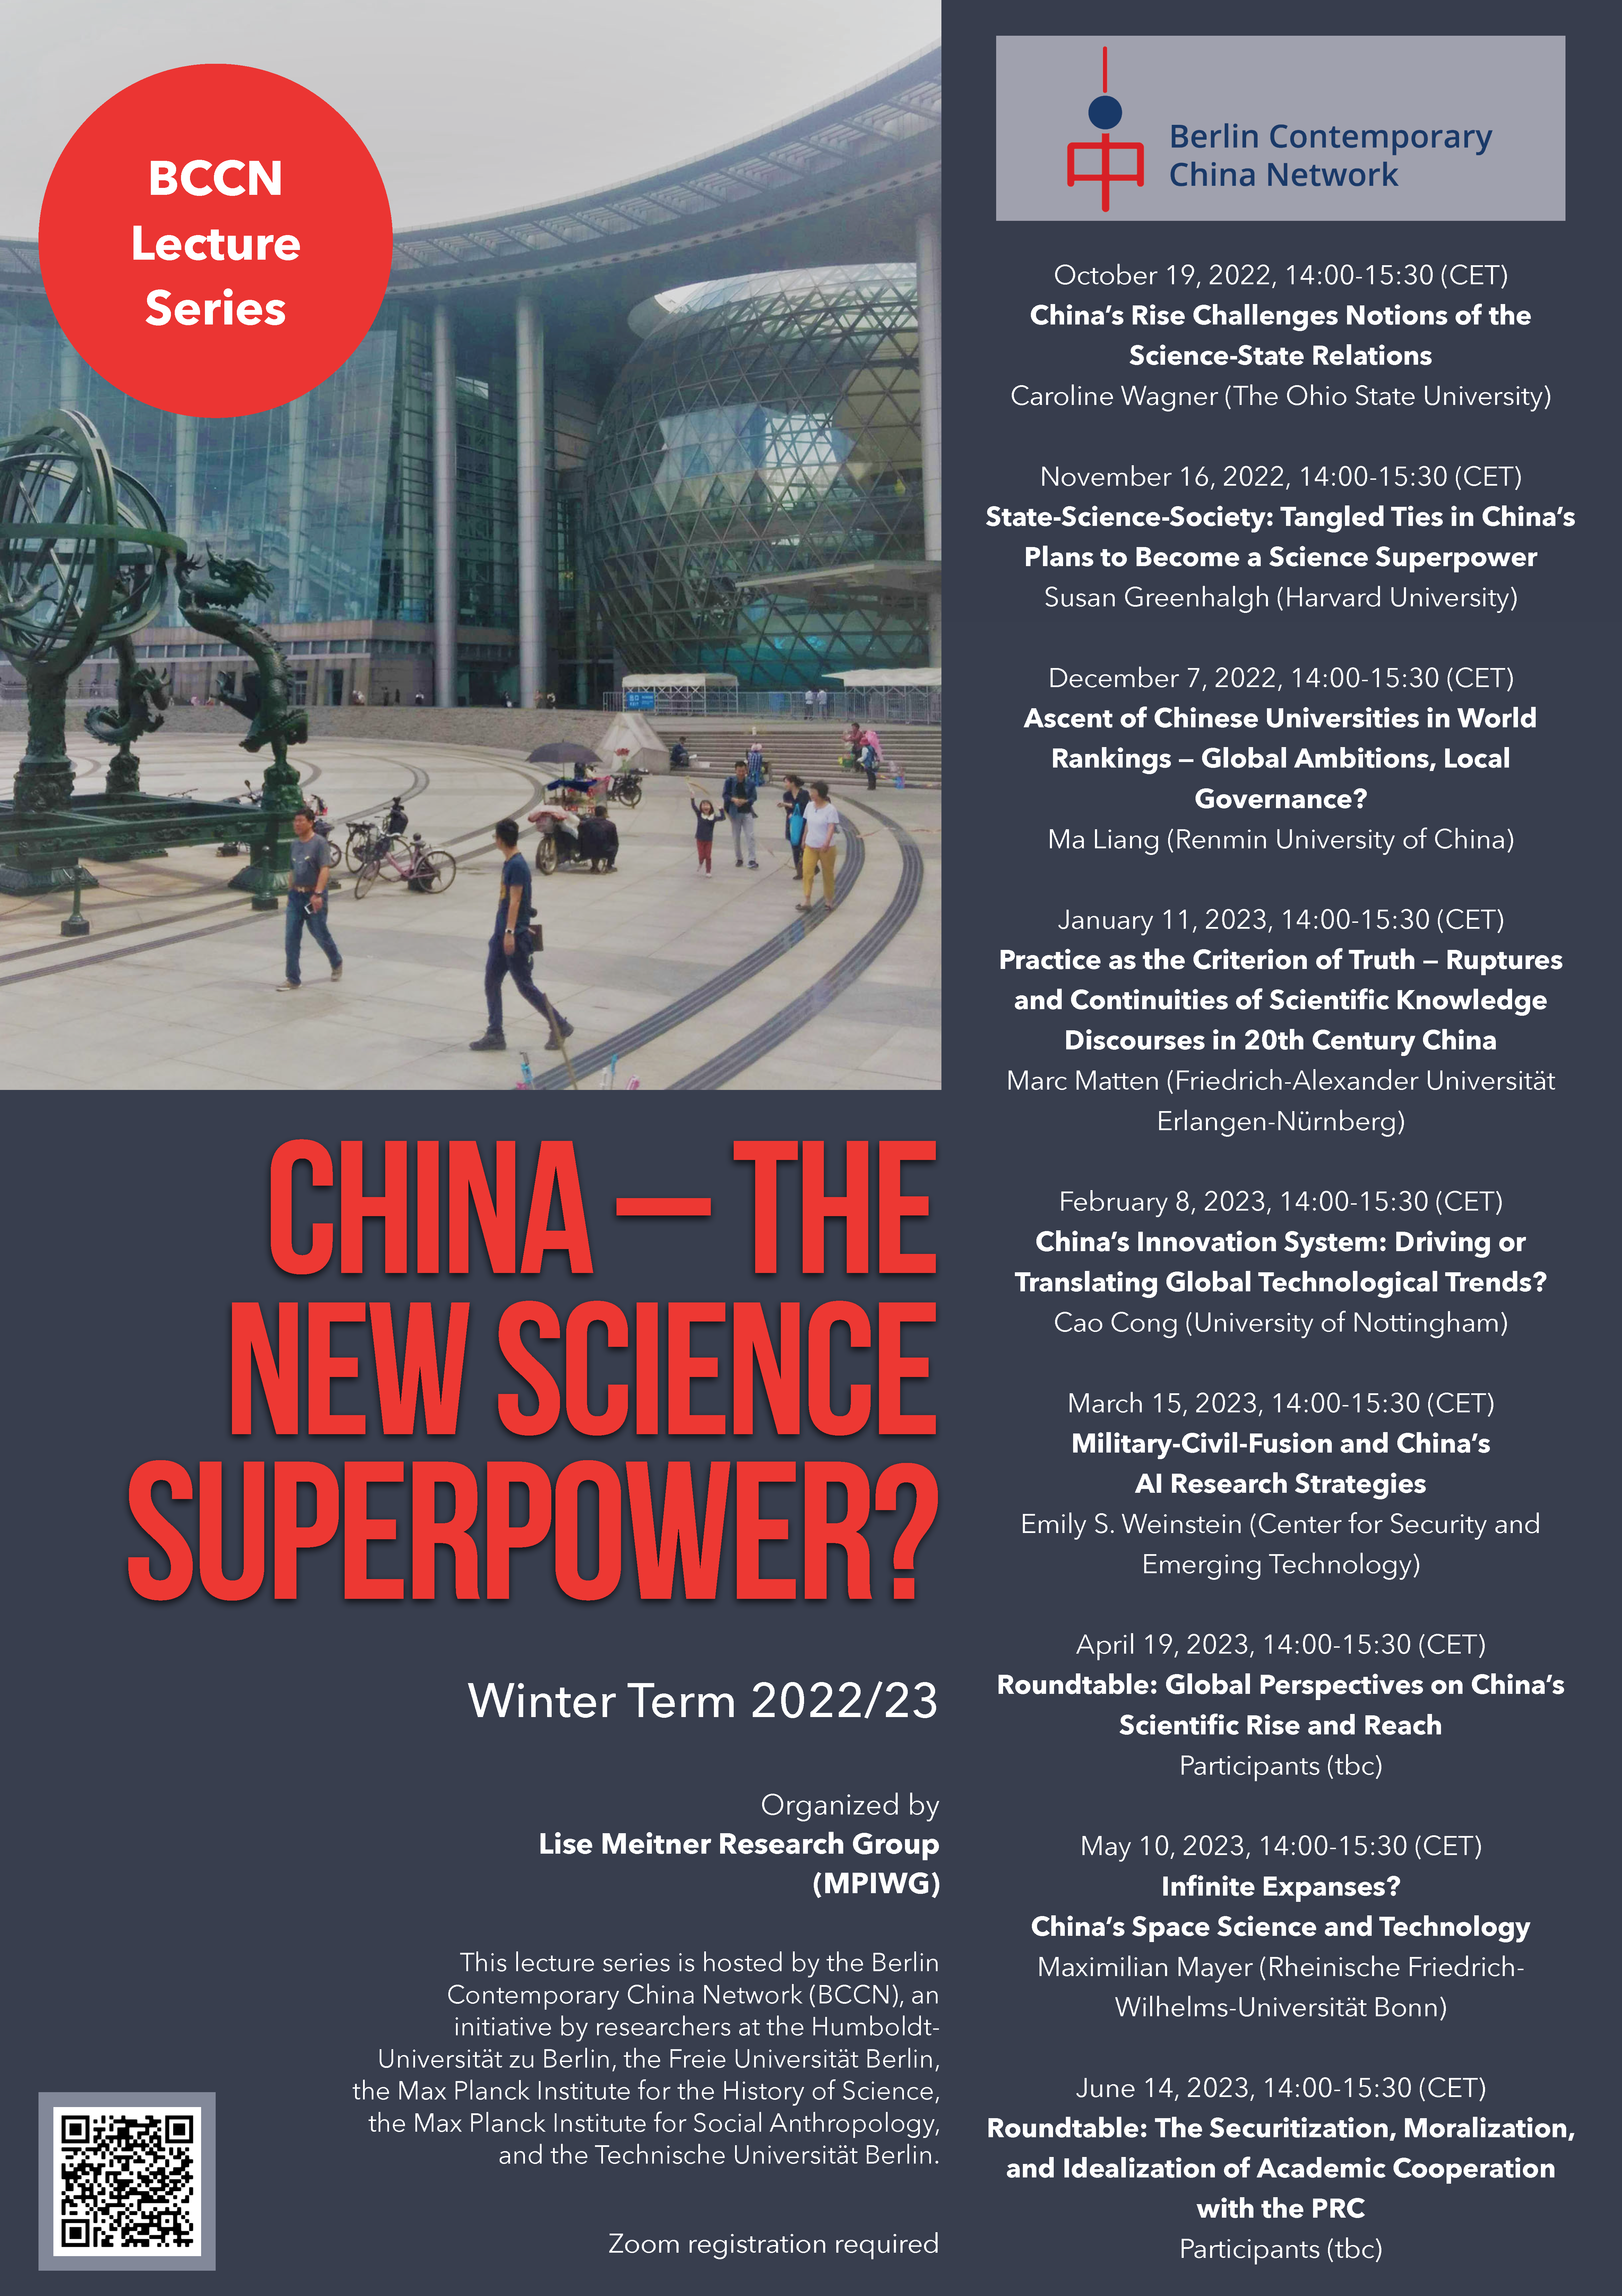 Poster for BCCN LMRG Series China Science Superpower 2022